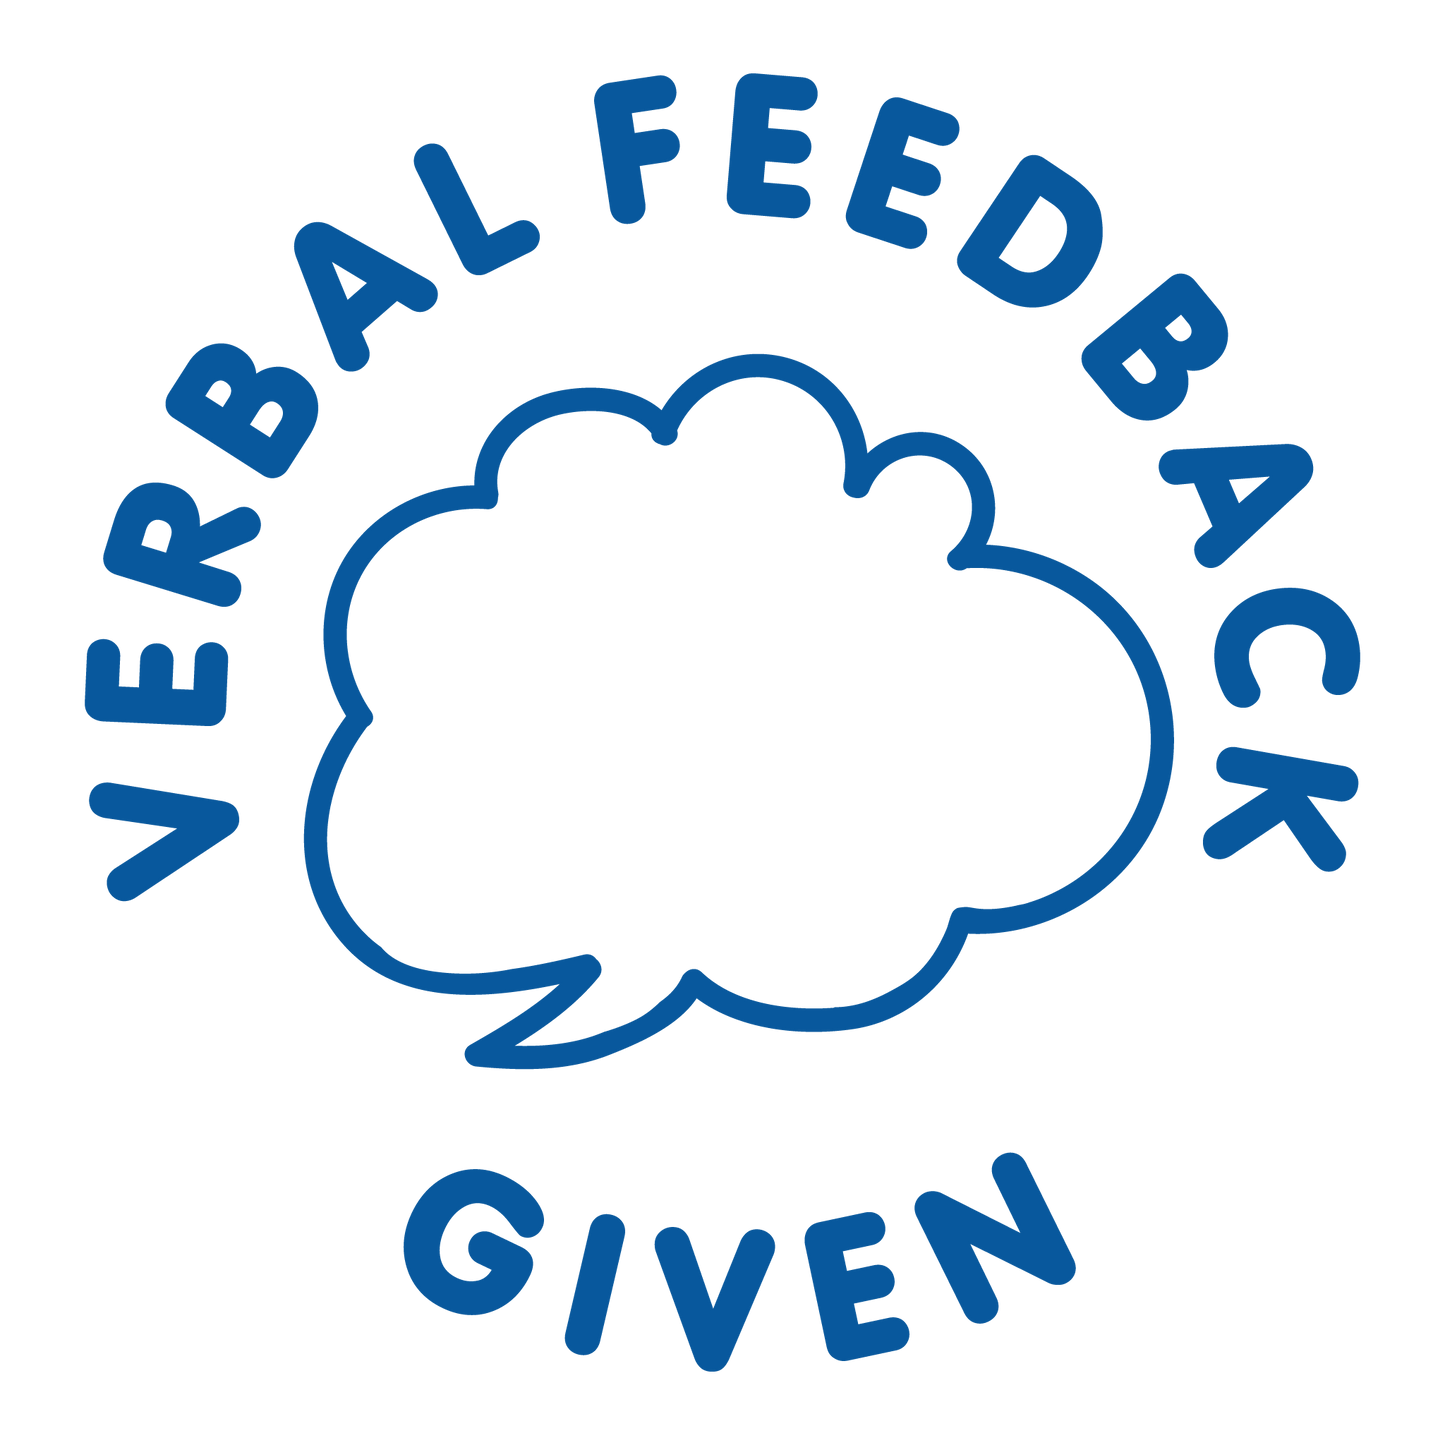 VERBAL FEEDBACK GIVEN STAMP